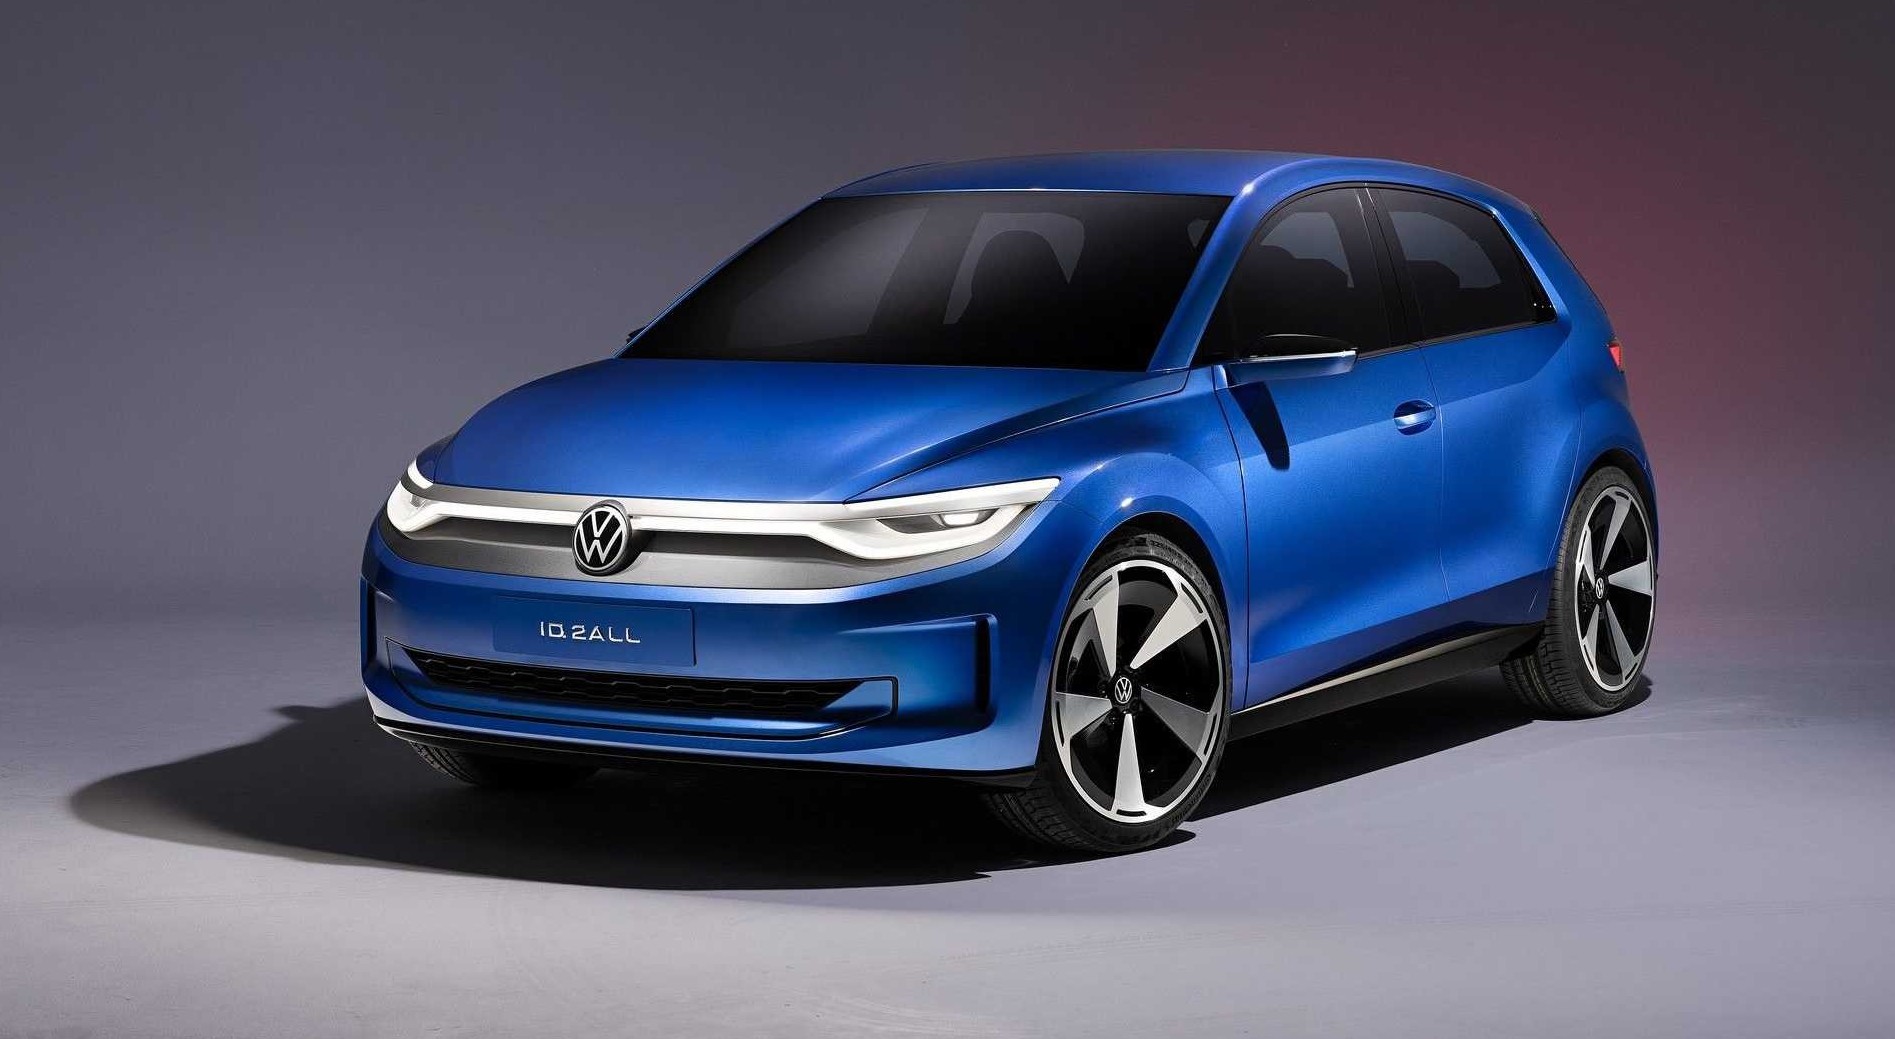 New Vw Id 2 All 20232024, still interesting previews on the city car